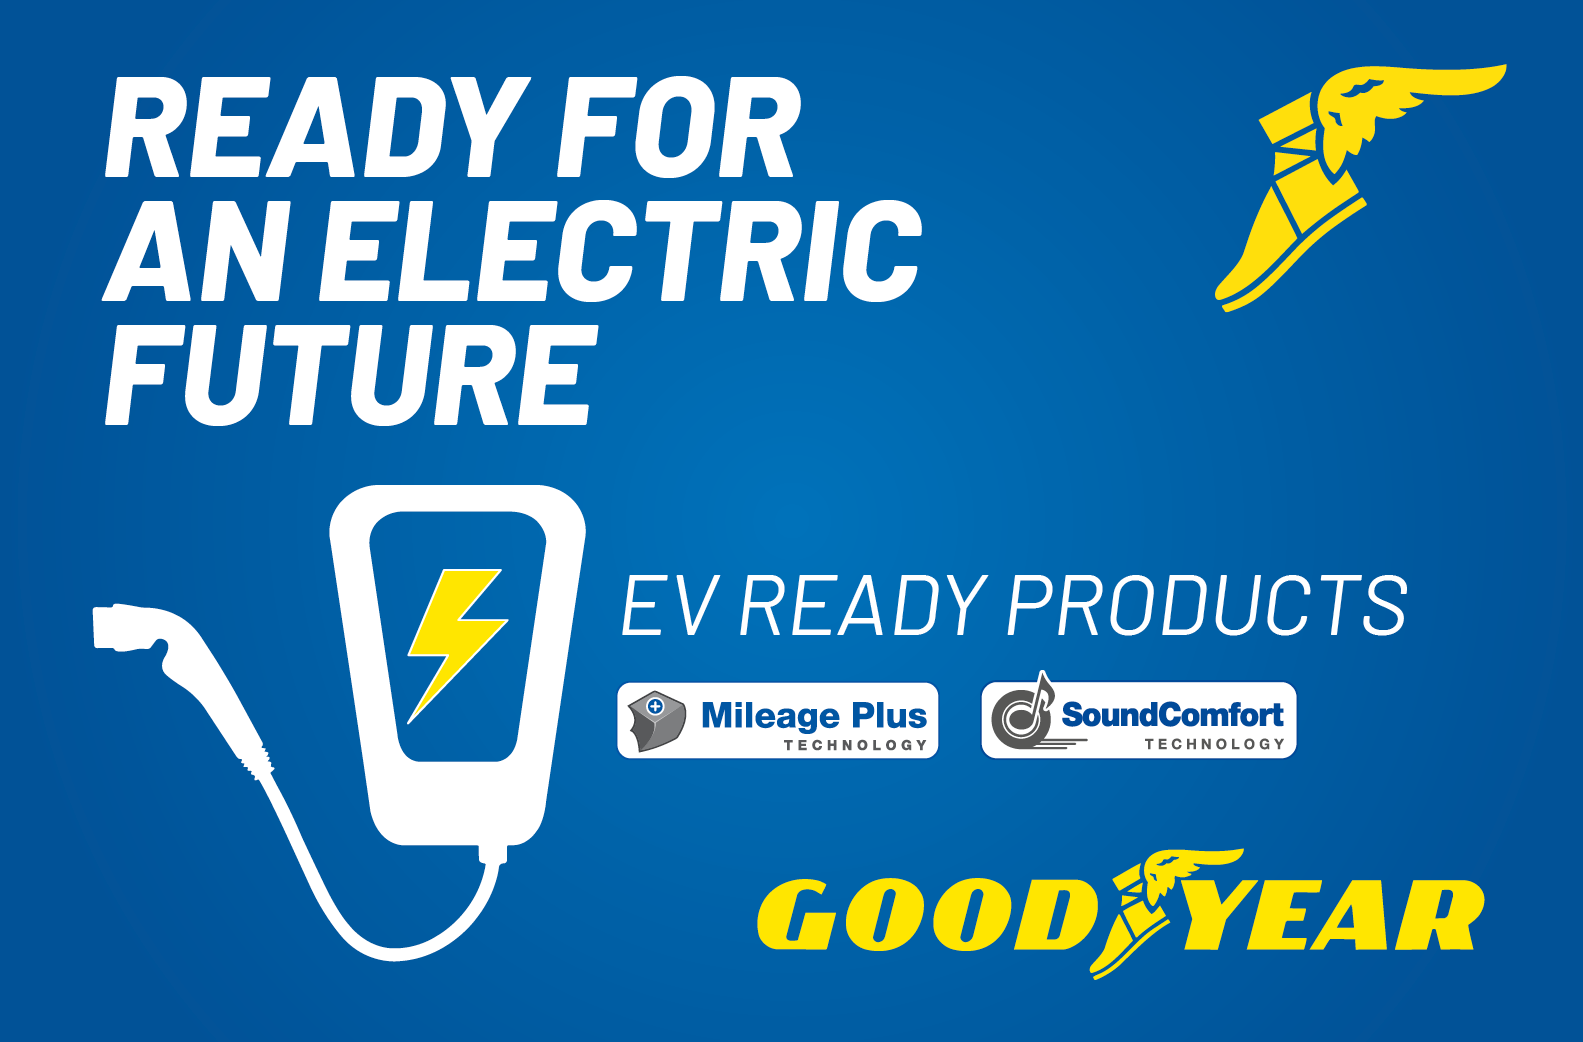 Goodyear: Ready for an Electric Future